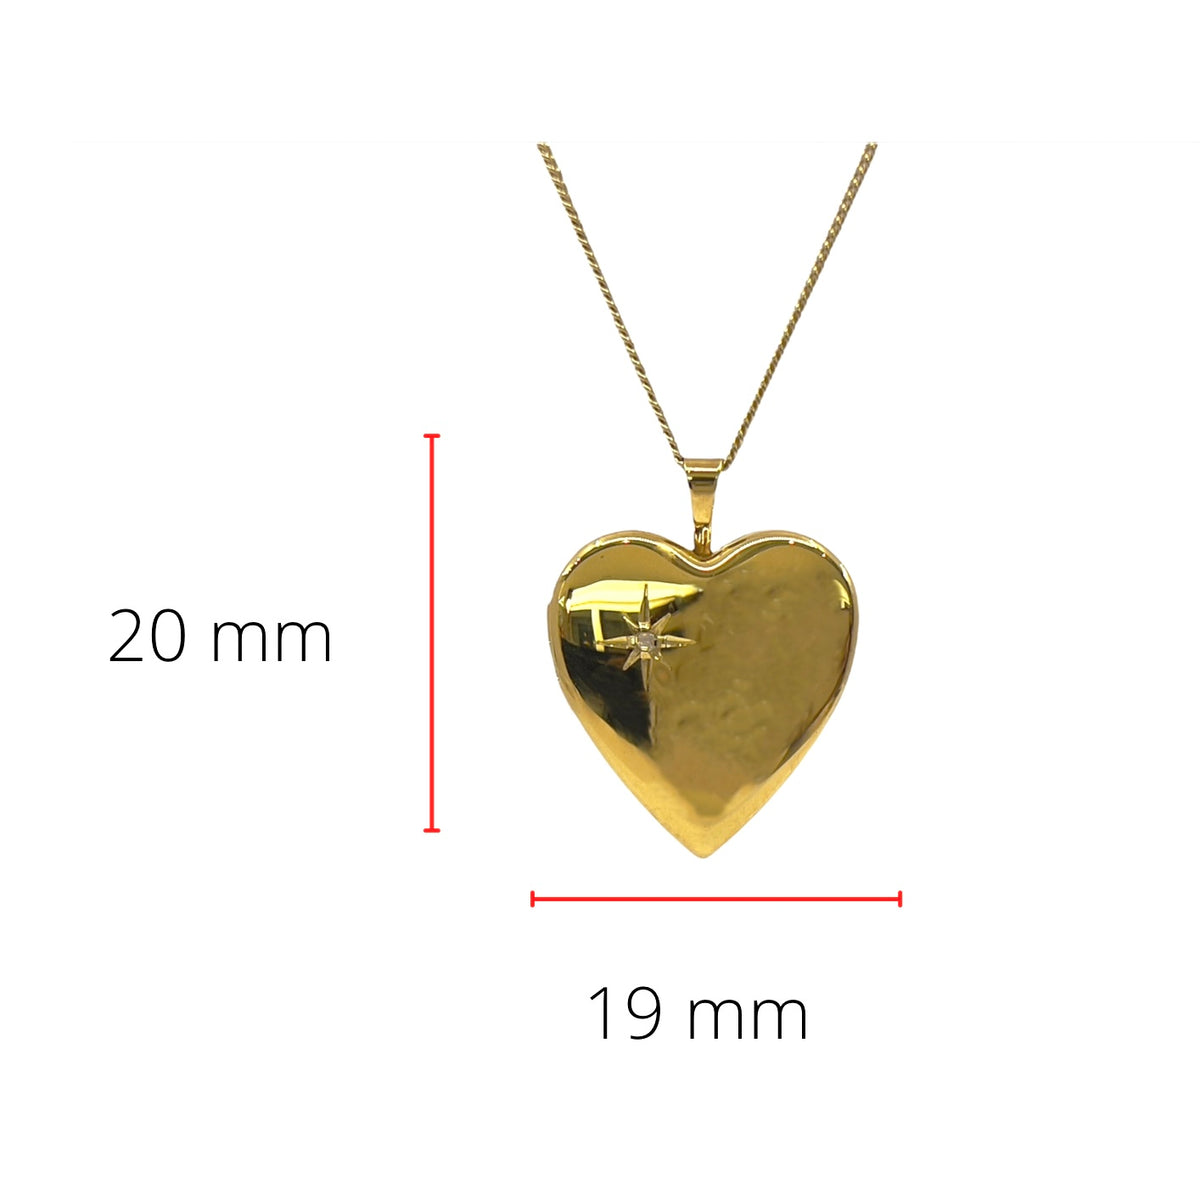 Gold Plated on 925 Sterling Silver Heart Shaped Locket with Cubic Zirconia set in Starbust Design - 20mm x 19mm